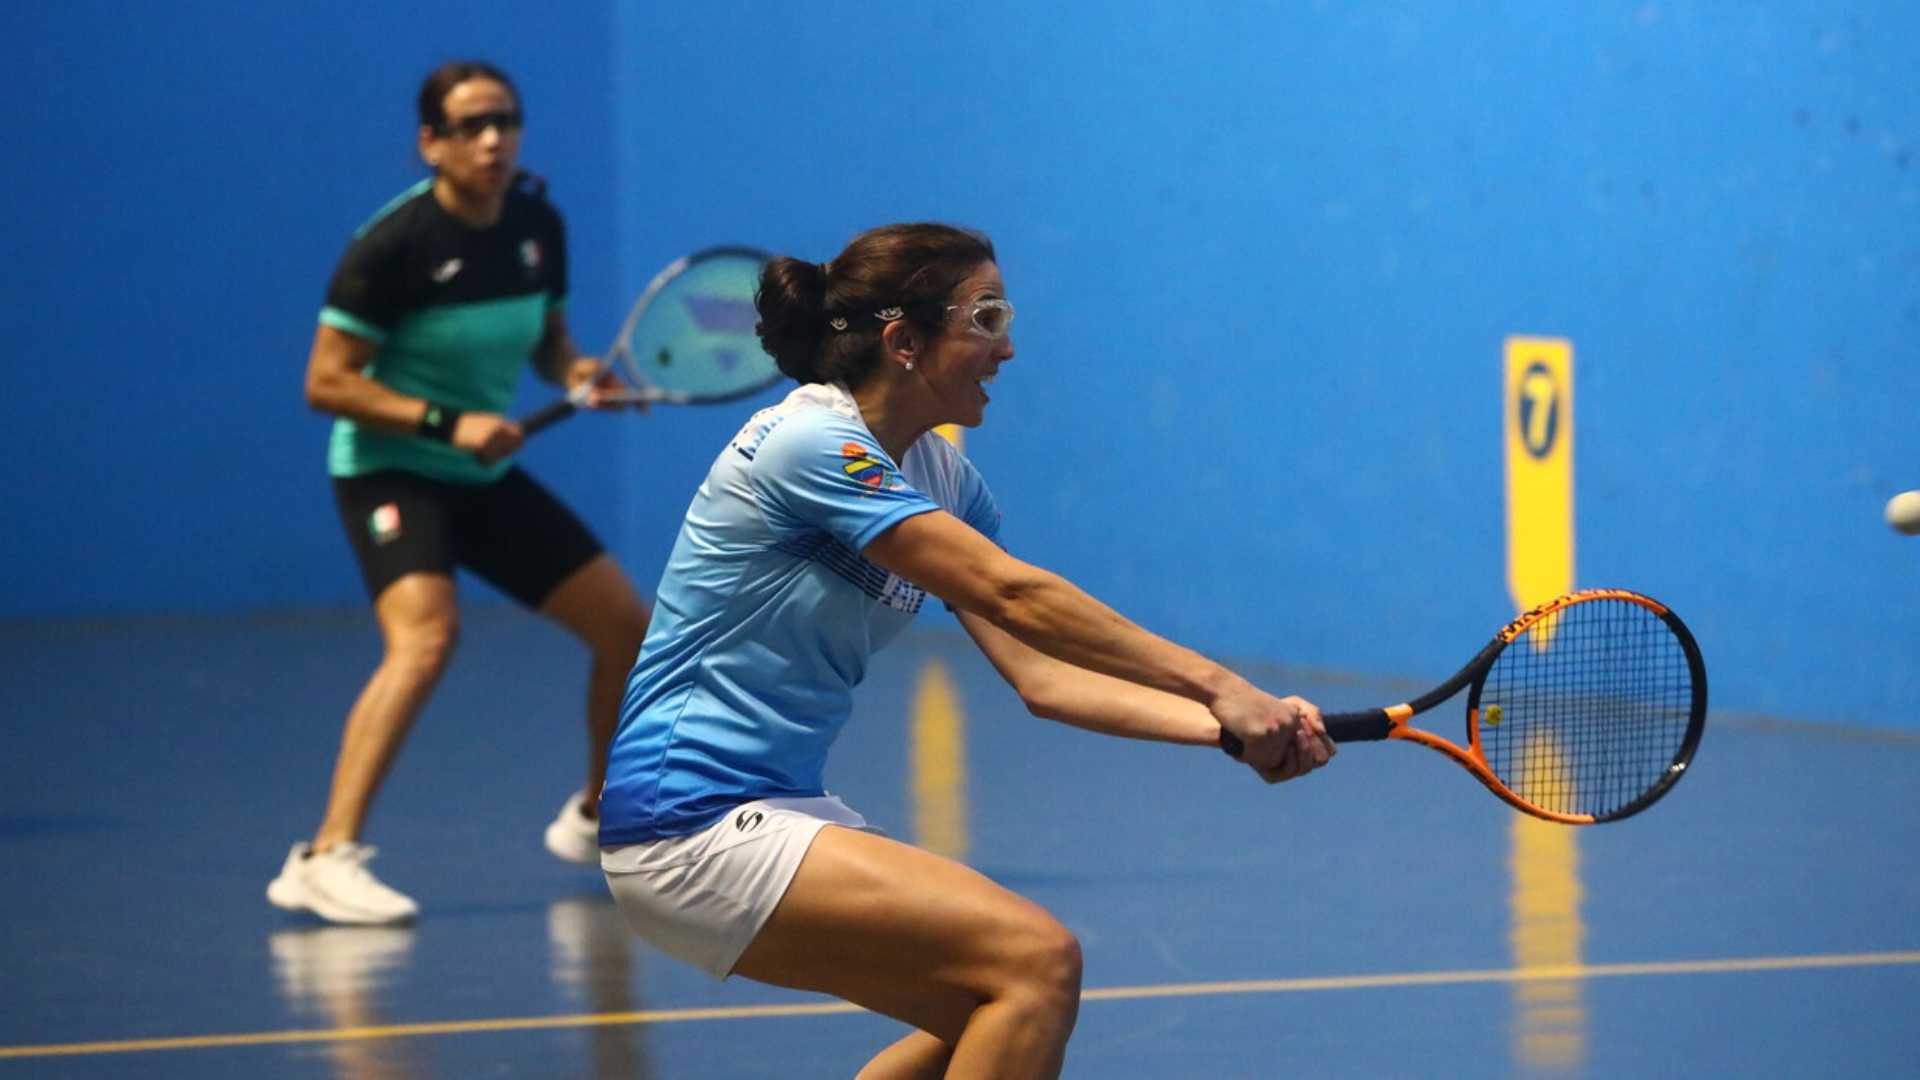 Basque pelota: Argentina obtains the best results of the day